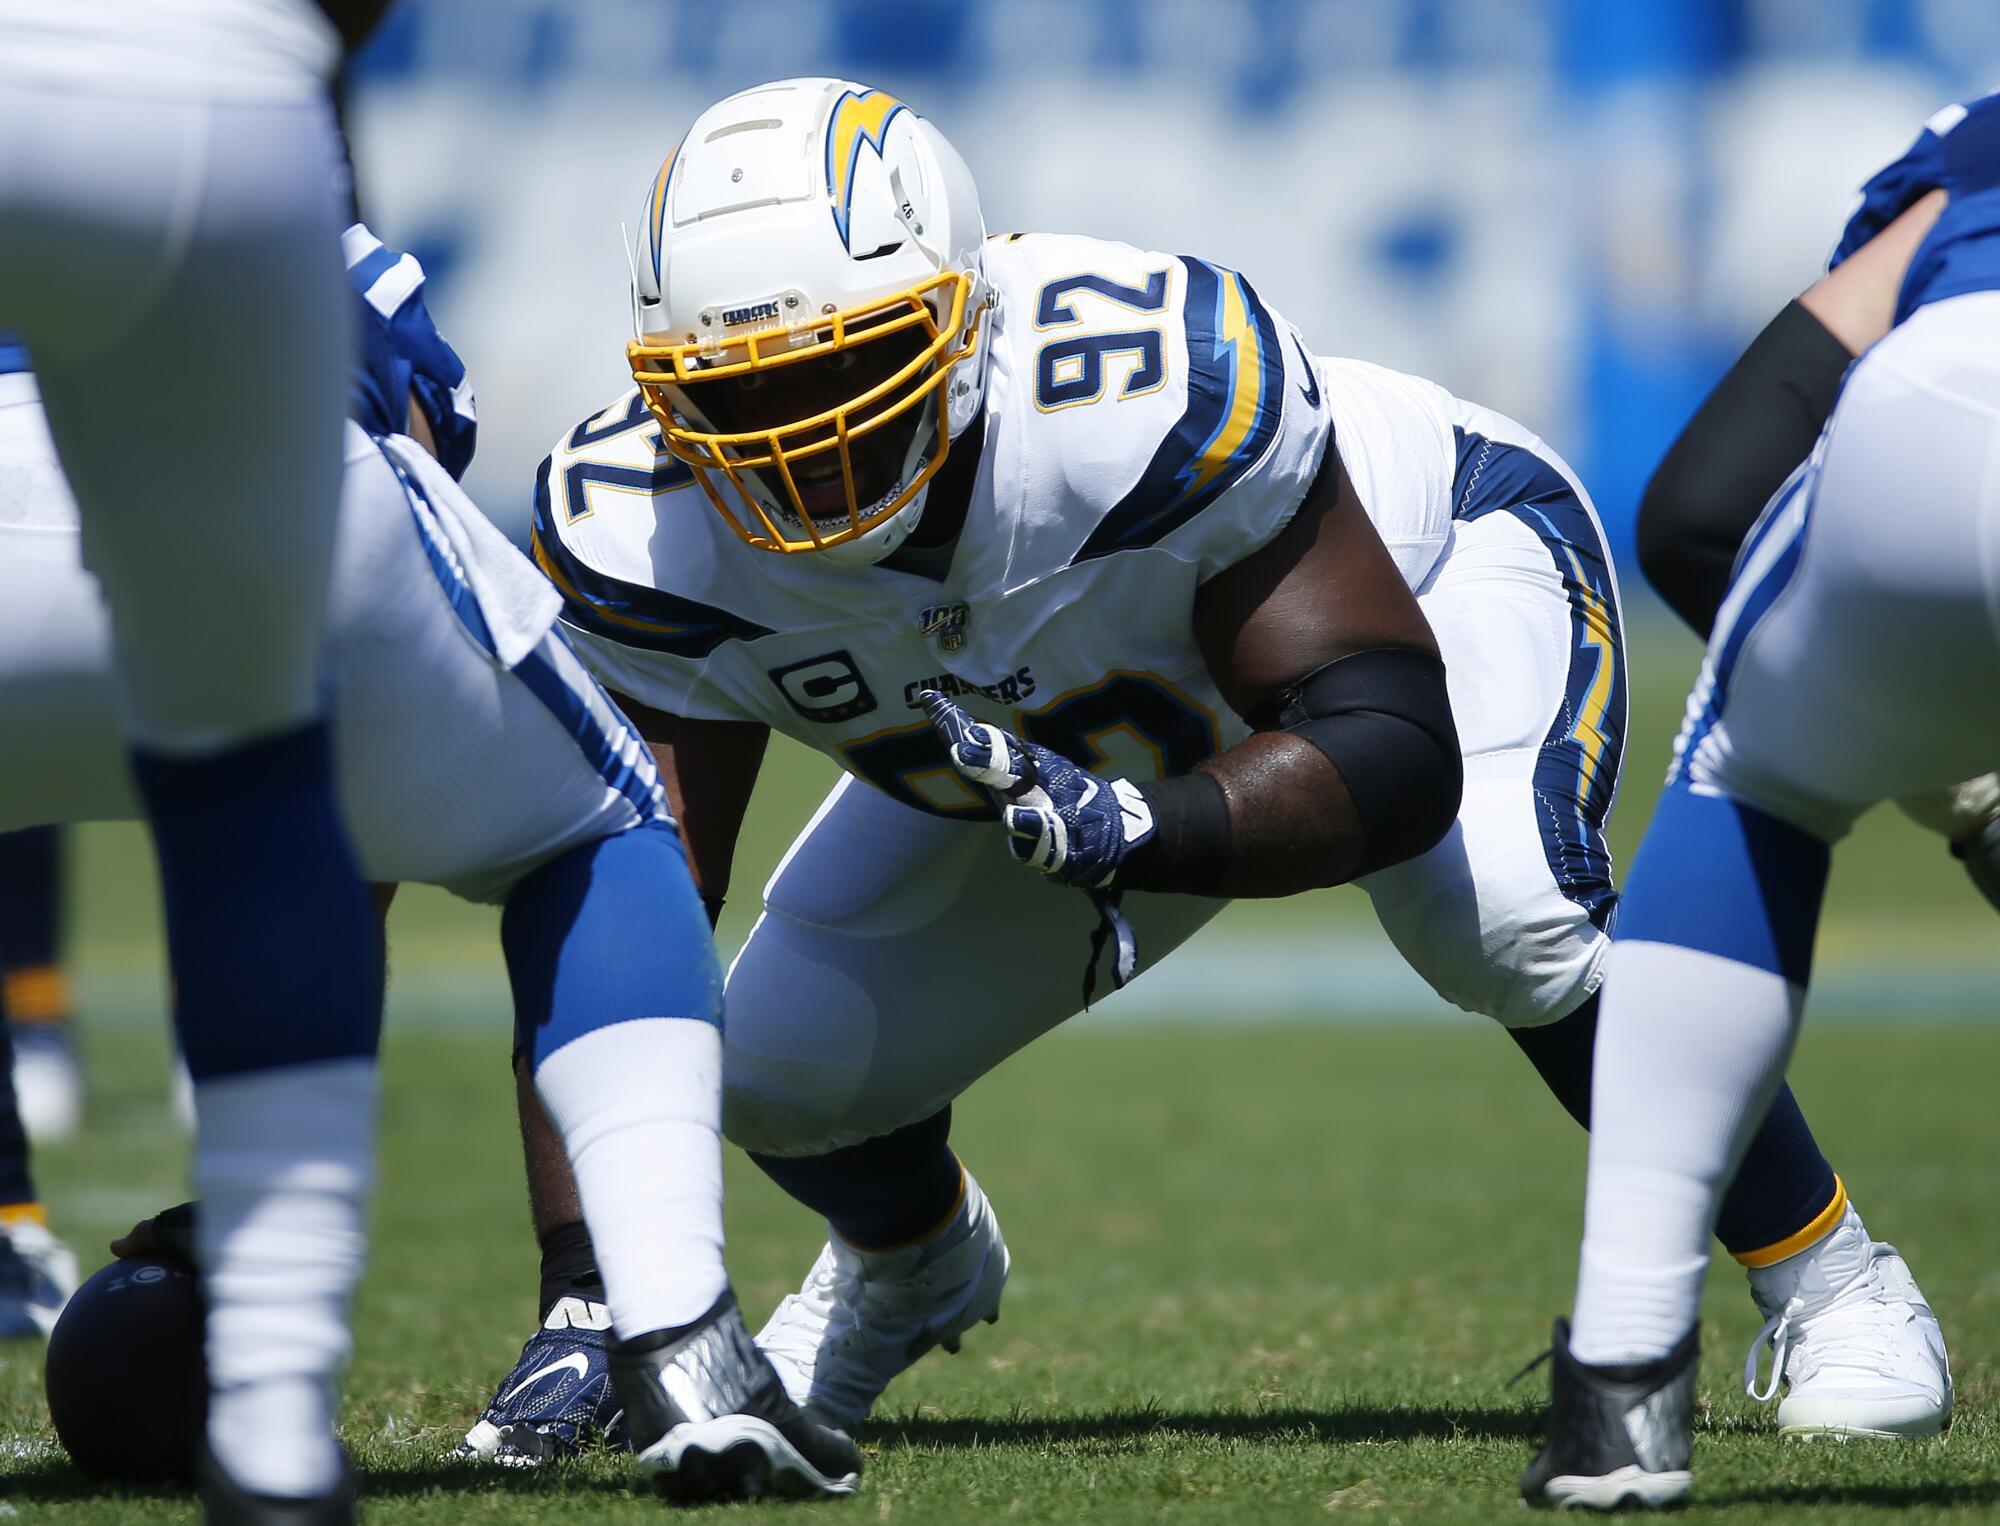 Chargers defensive lineman Brandon Mebane gets set at the line of scrimmage during a game against the Colts.